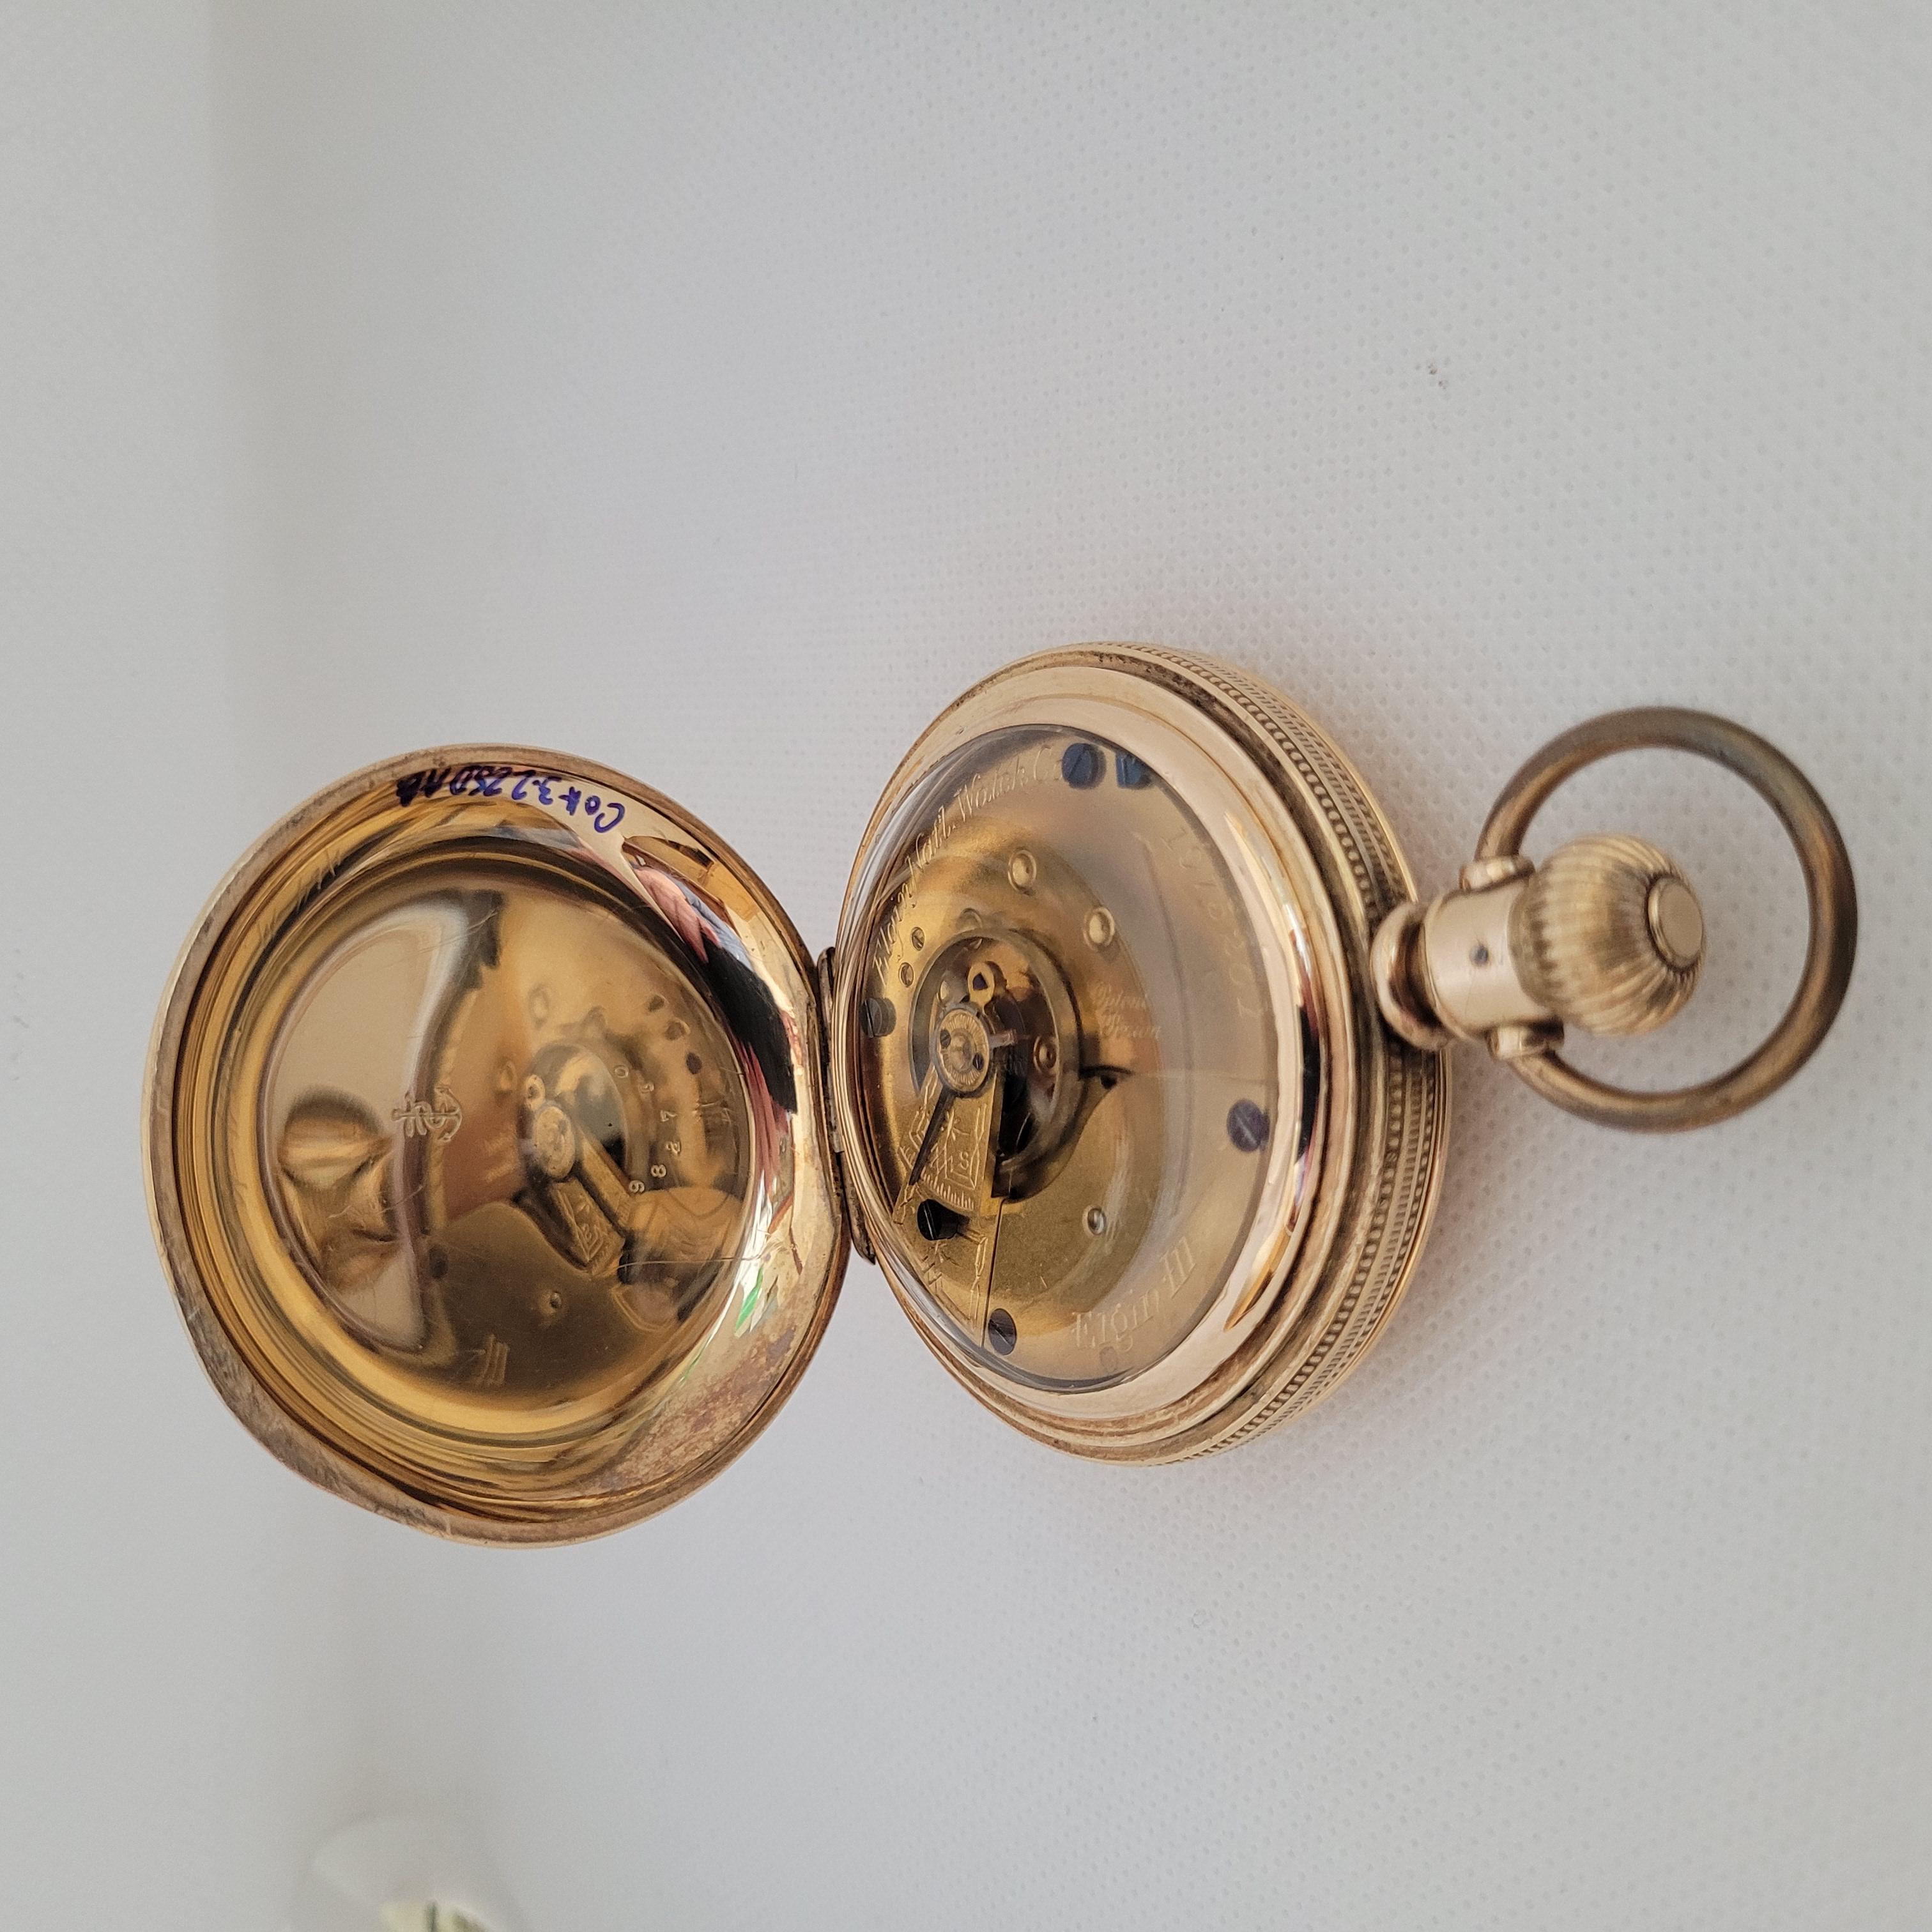 Elgin Gold Plated Pocket Watch, 53mm, 1886 Year, Hunting, Serviced/Warranty  For Sale 2